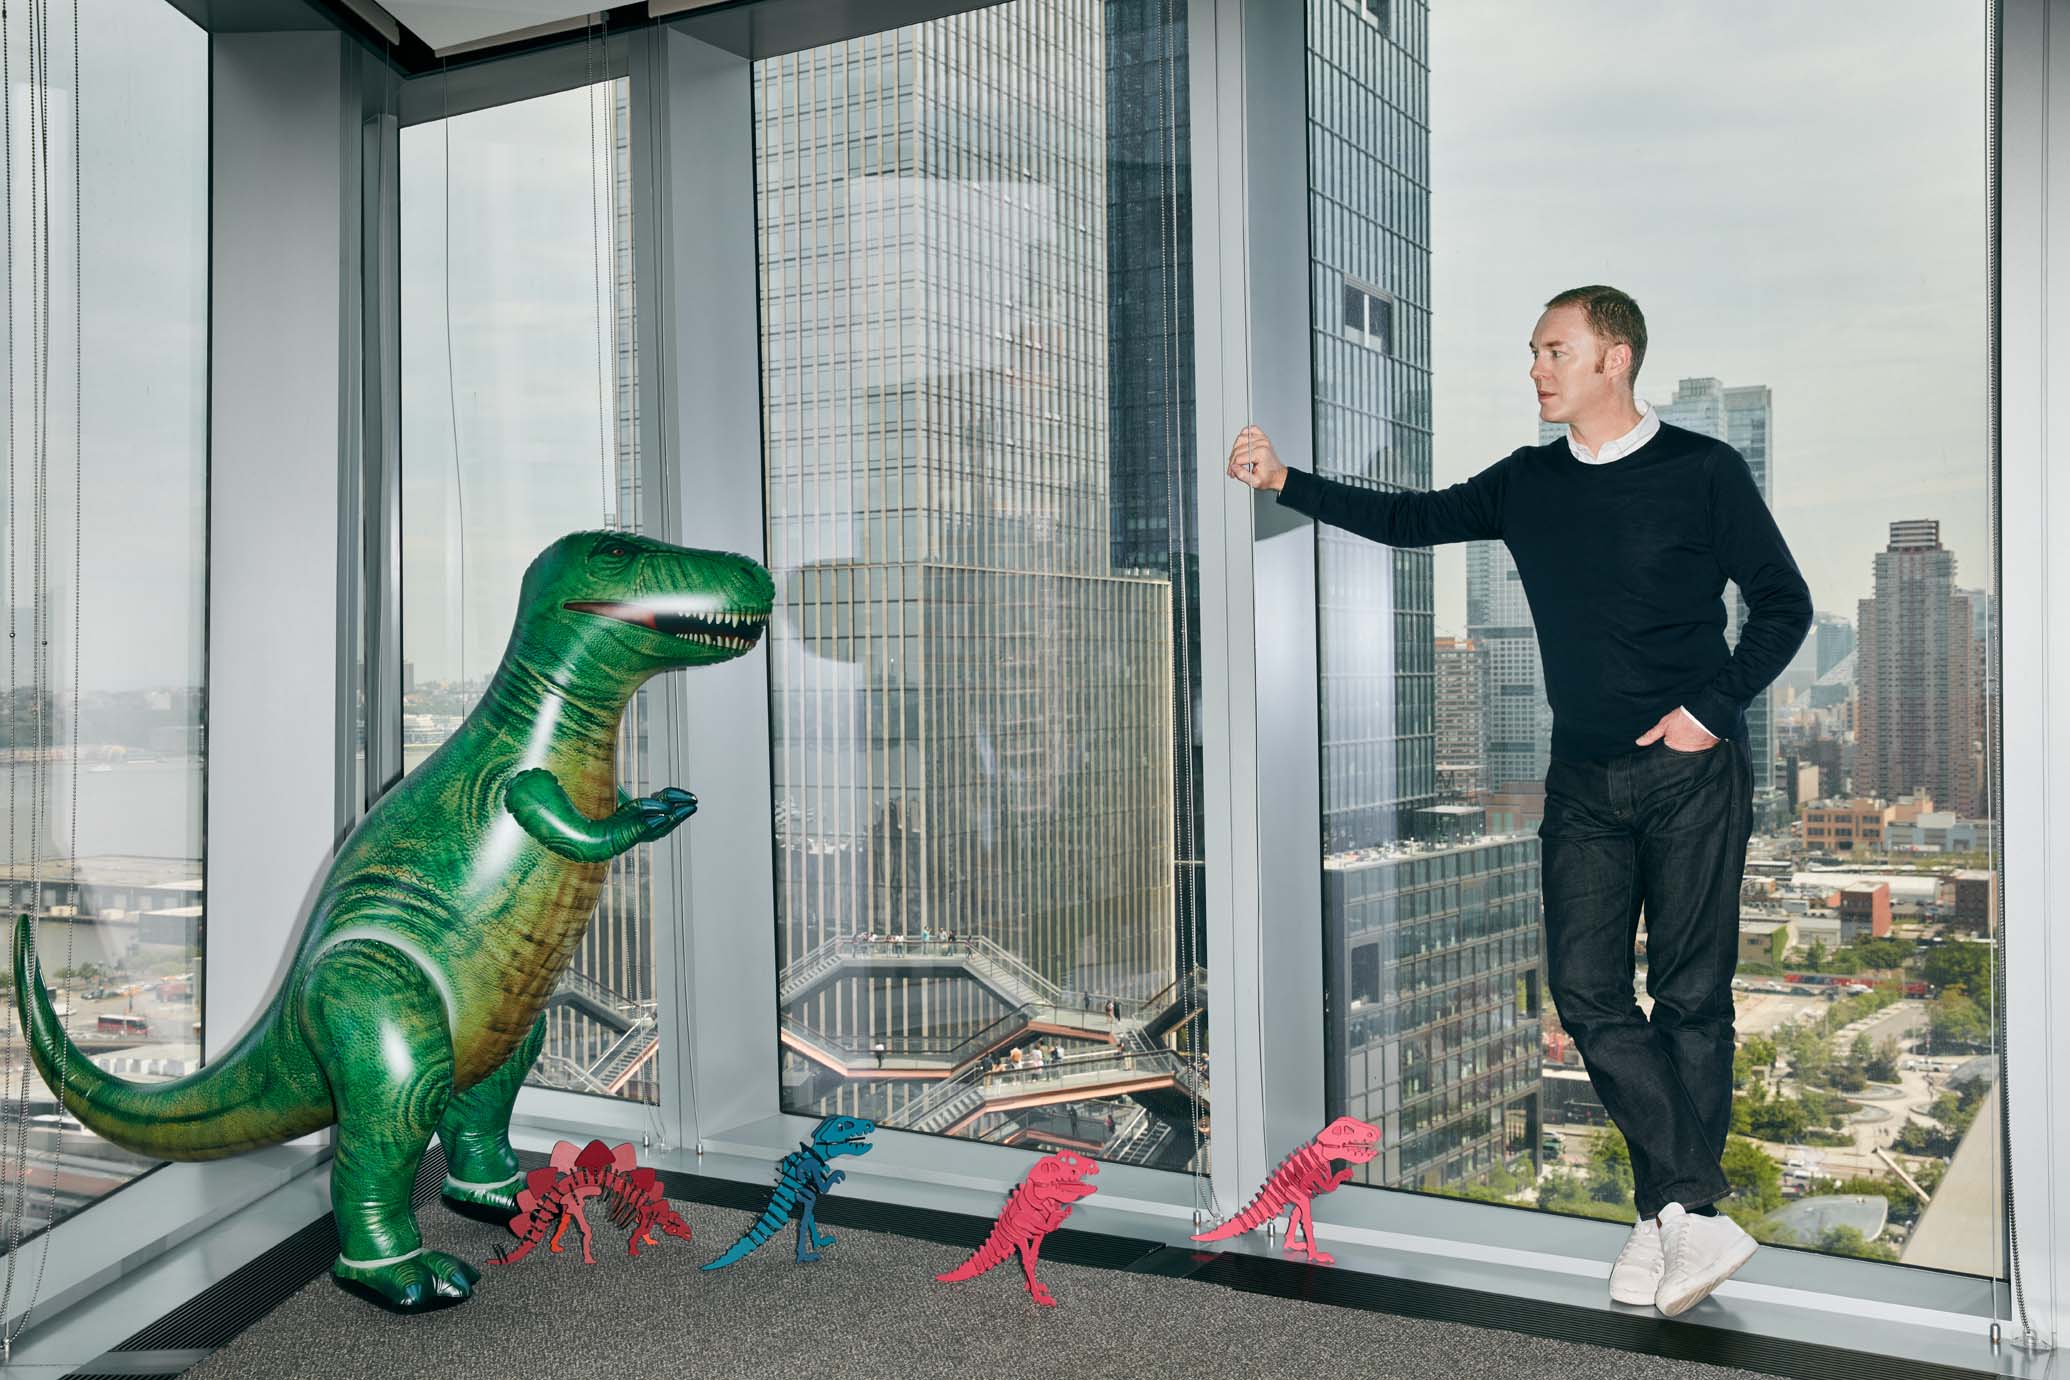 Stuart Vever's in his office with Rexy. 